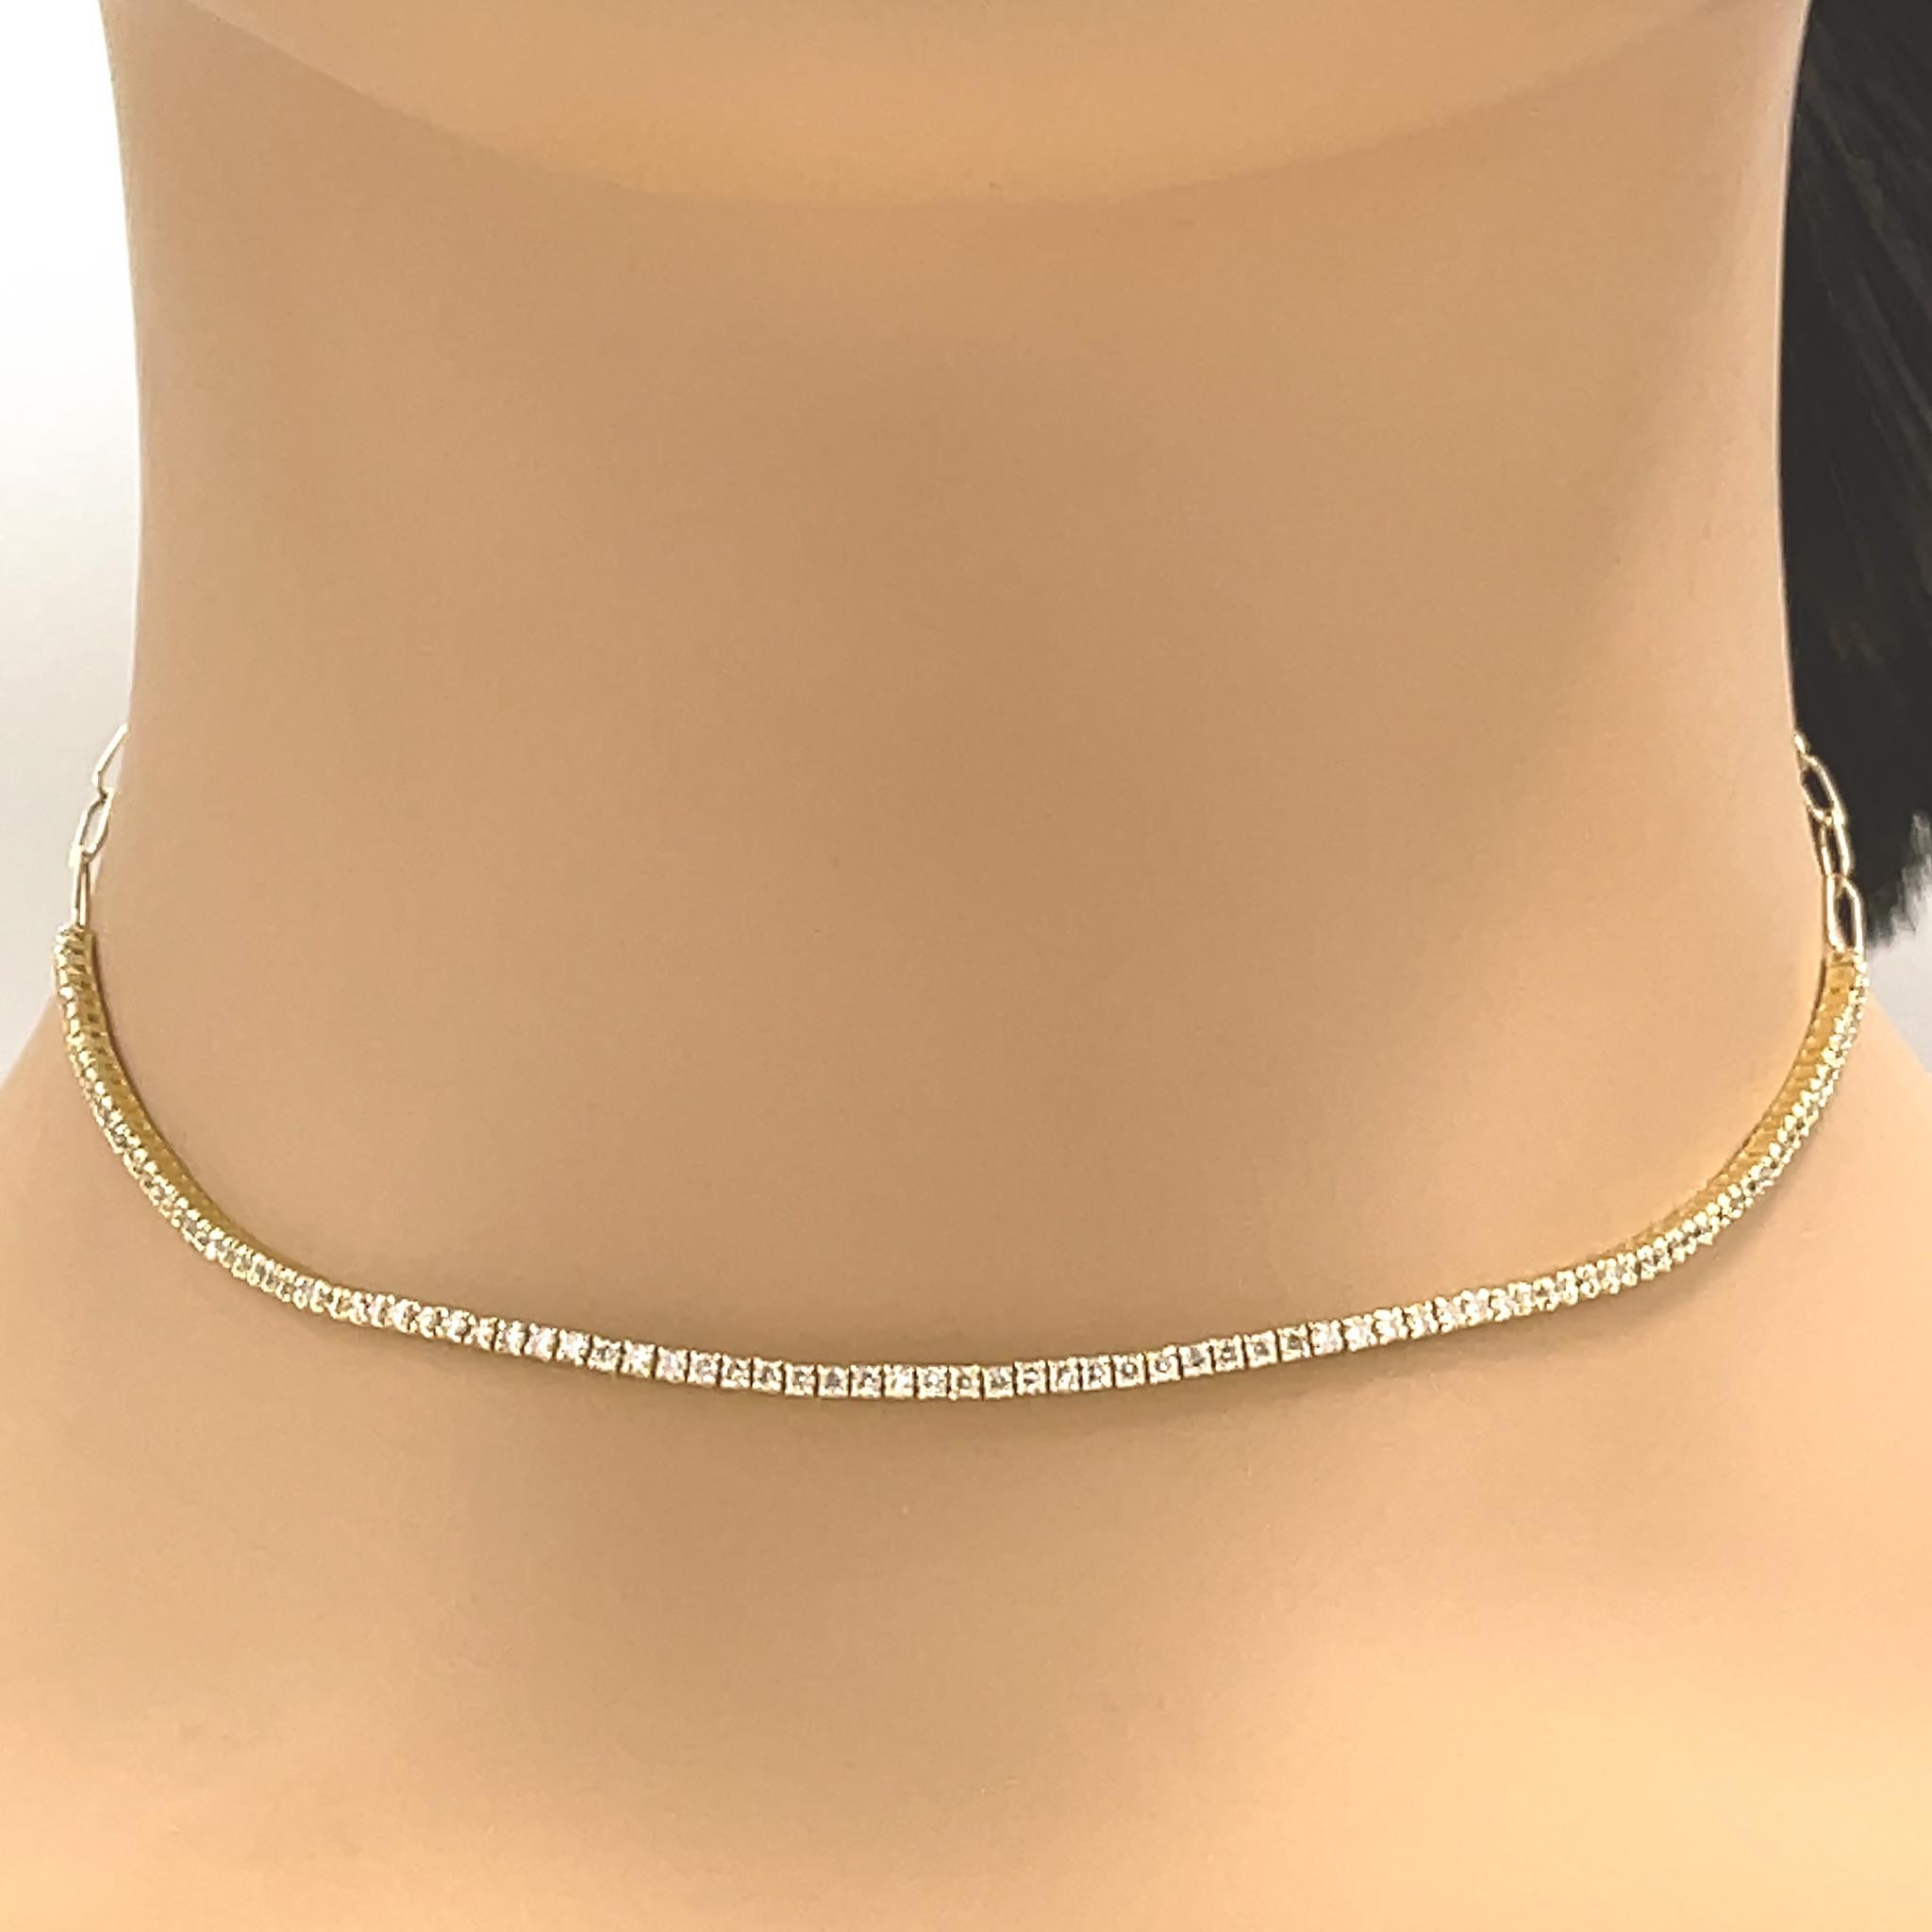 18k White Gold
Diamond: 1.56 ct twd
*** This necklace is also available in 18 kt Yellow Gold.